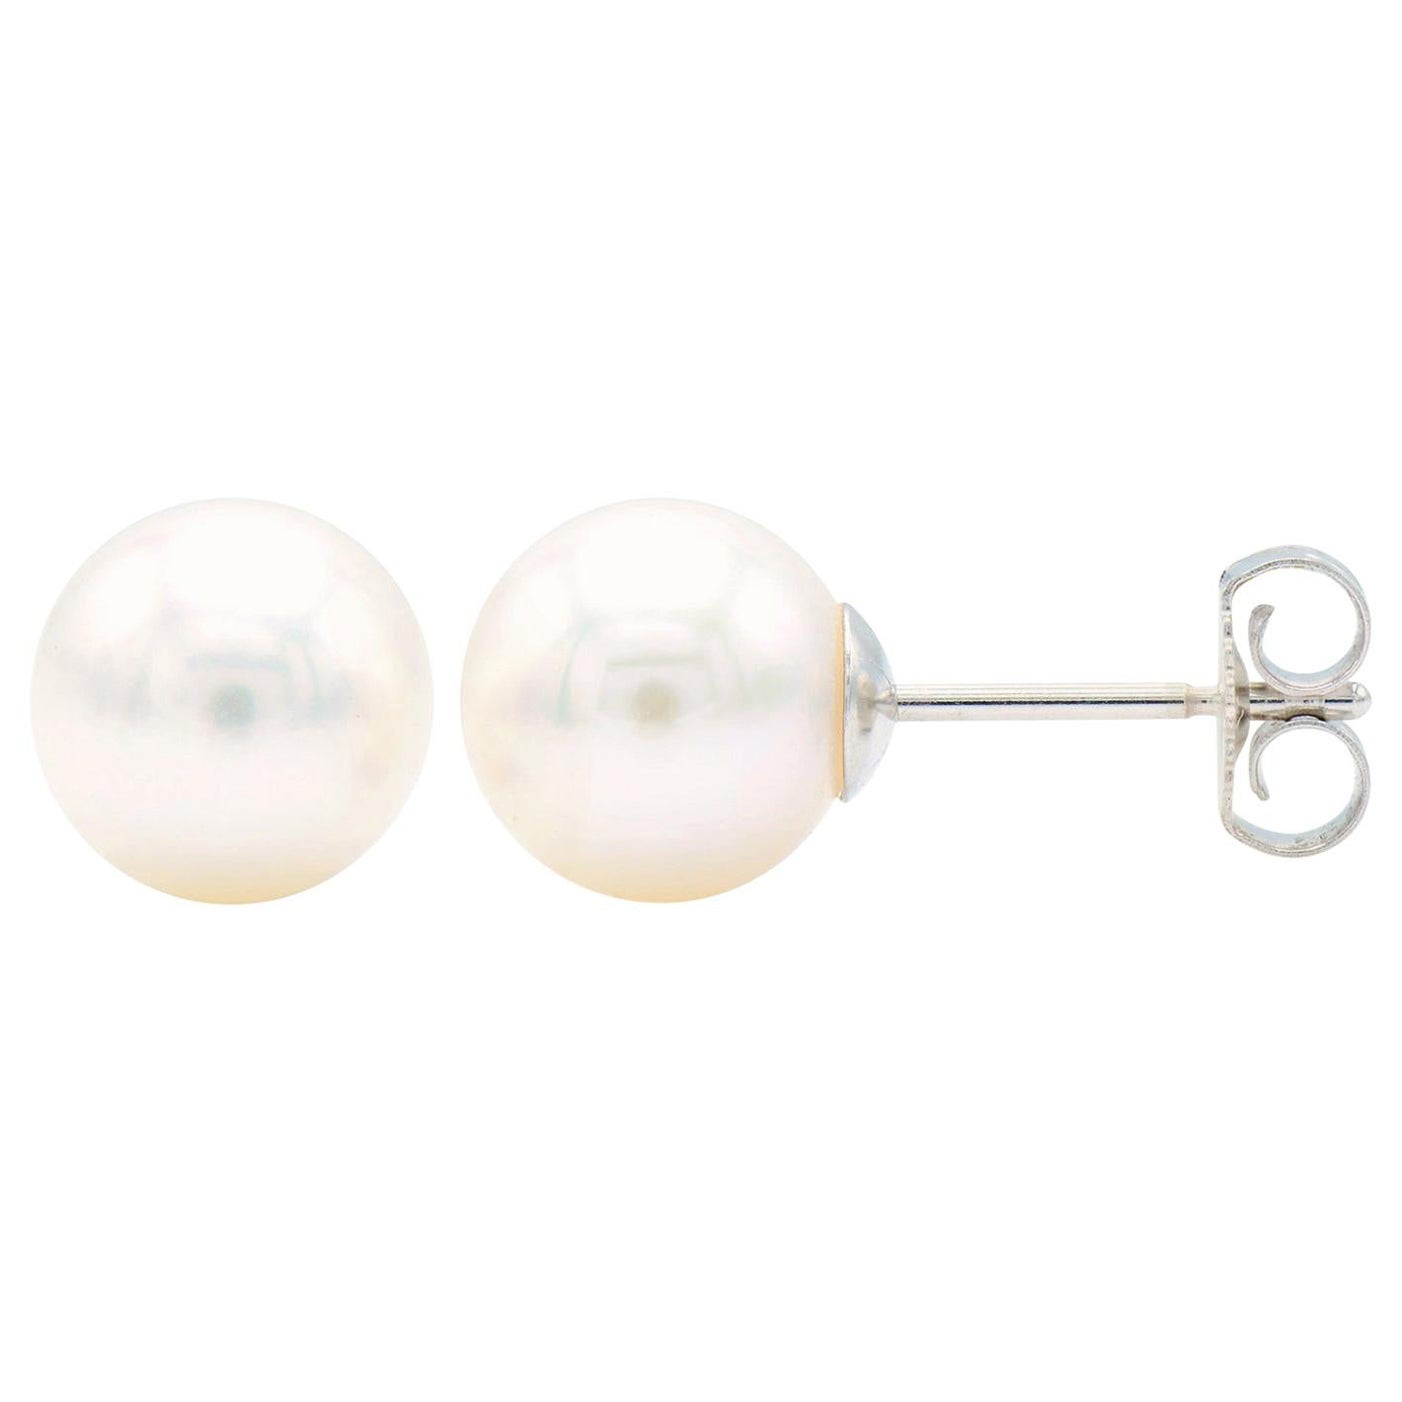 Cultured Pearl Stud Earrings with 14 Karat White Gold Post and Back